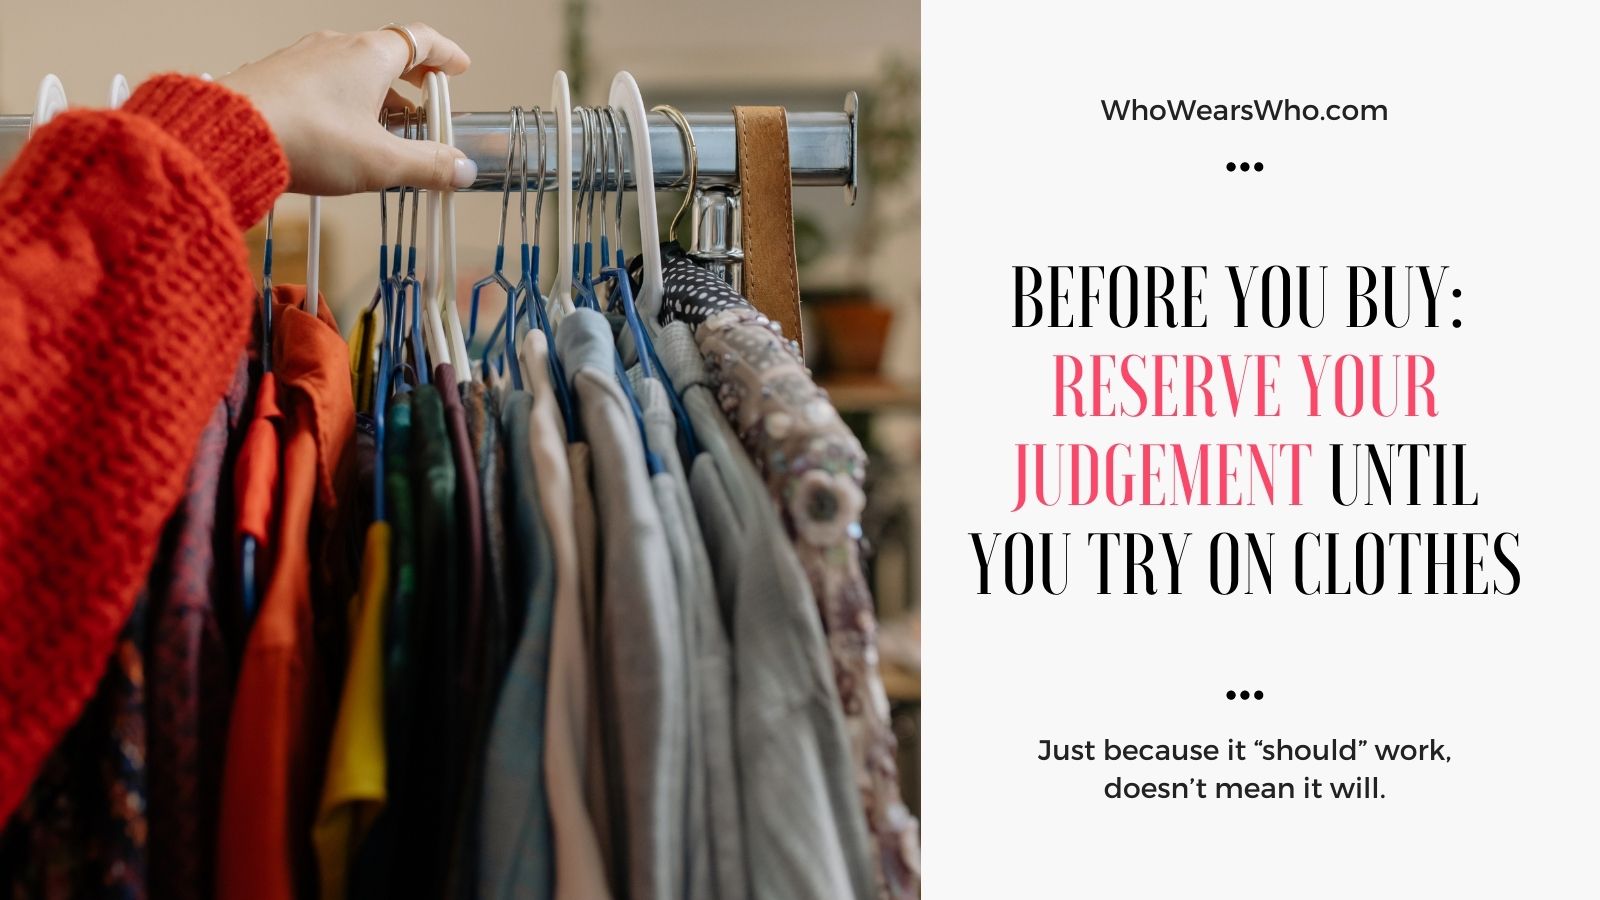 Before You Buy reserve your judgement until you try on clothes Twitter